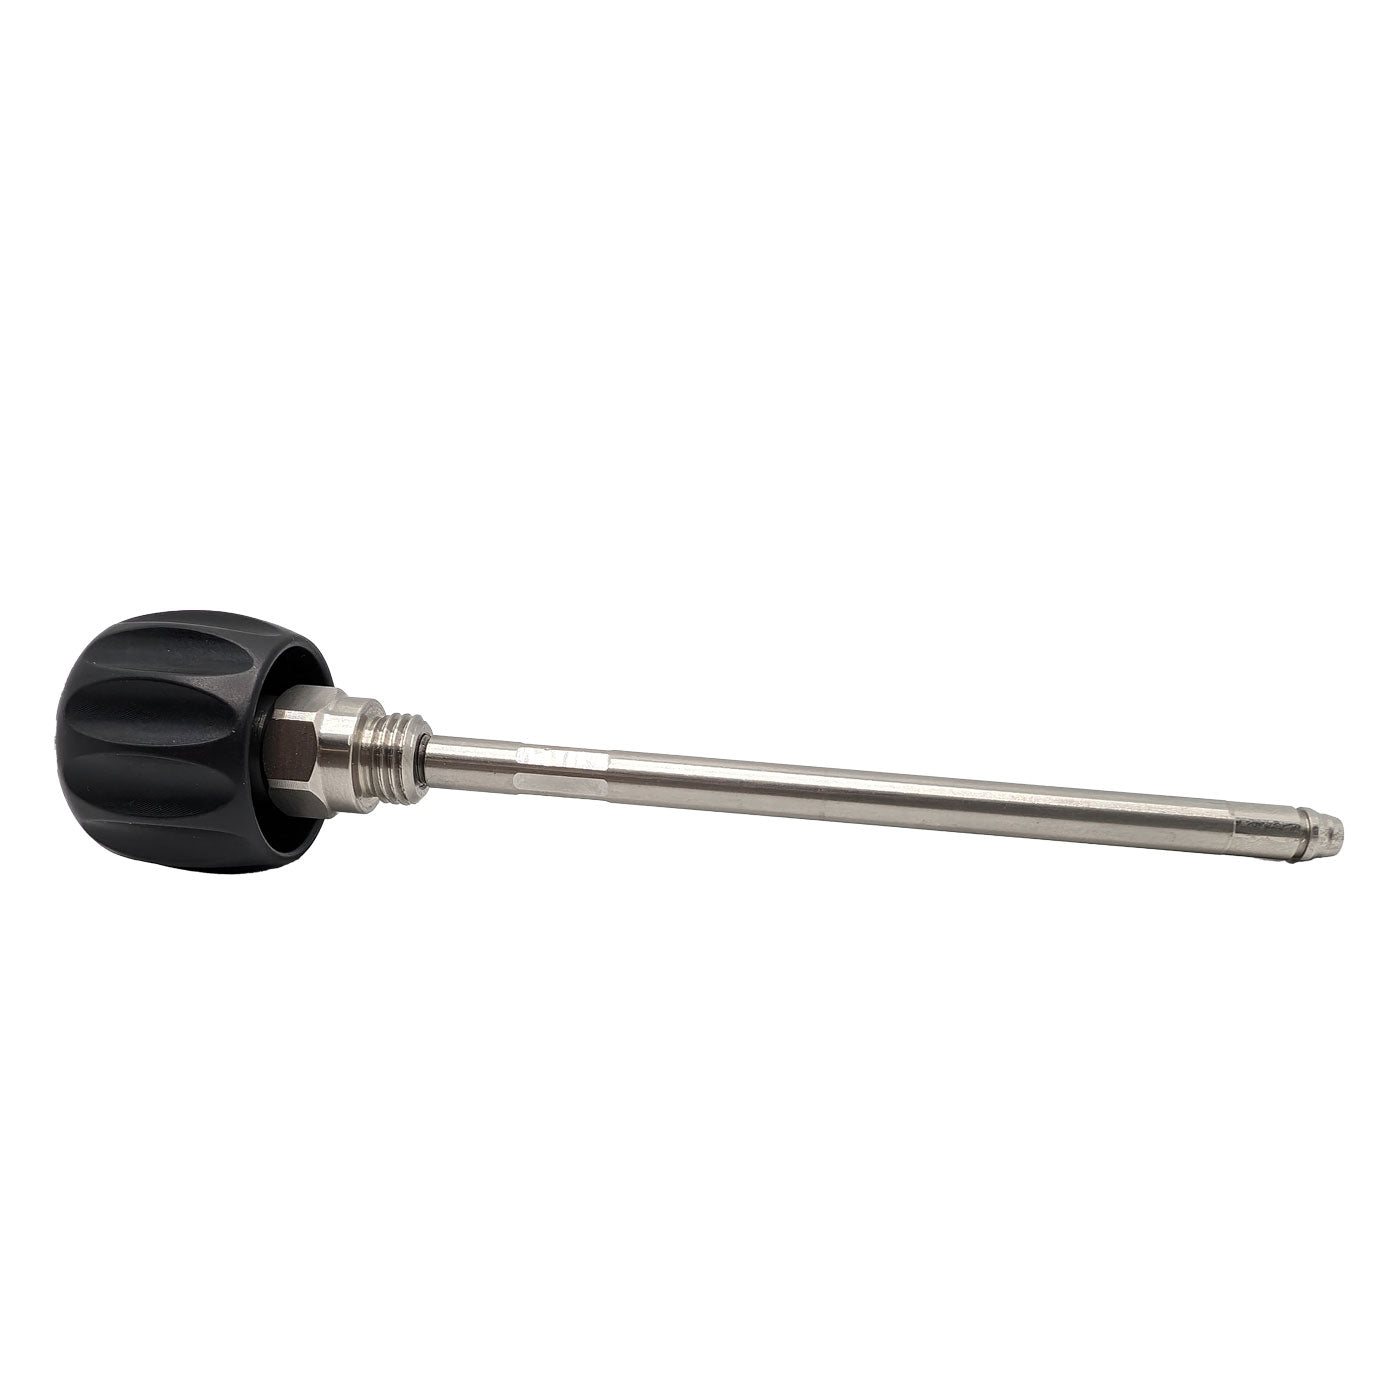 GKJR Replacement Panning Knob side profile